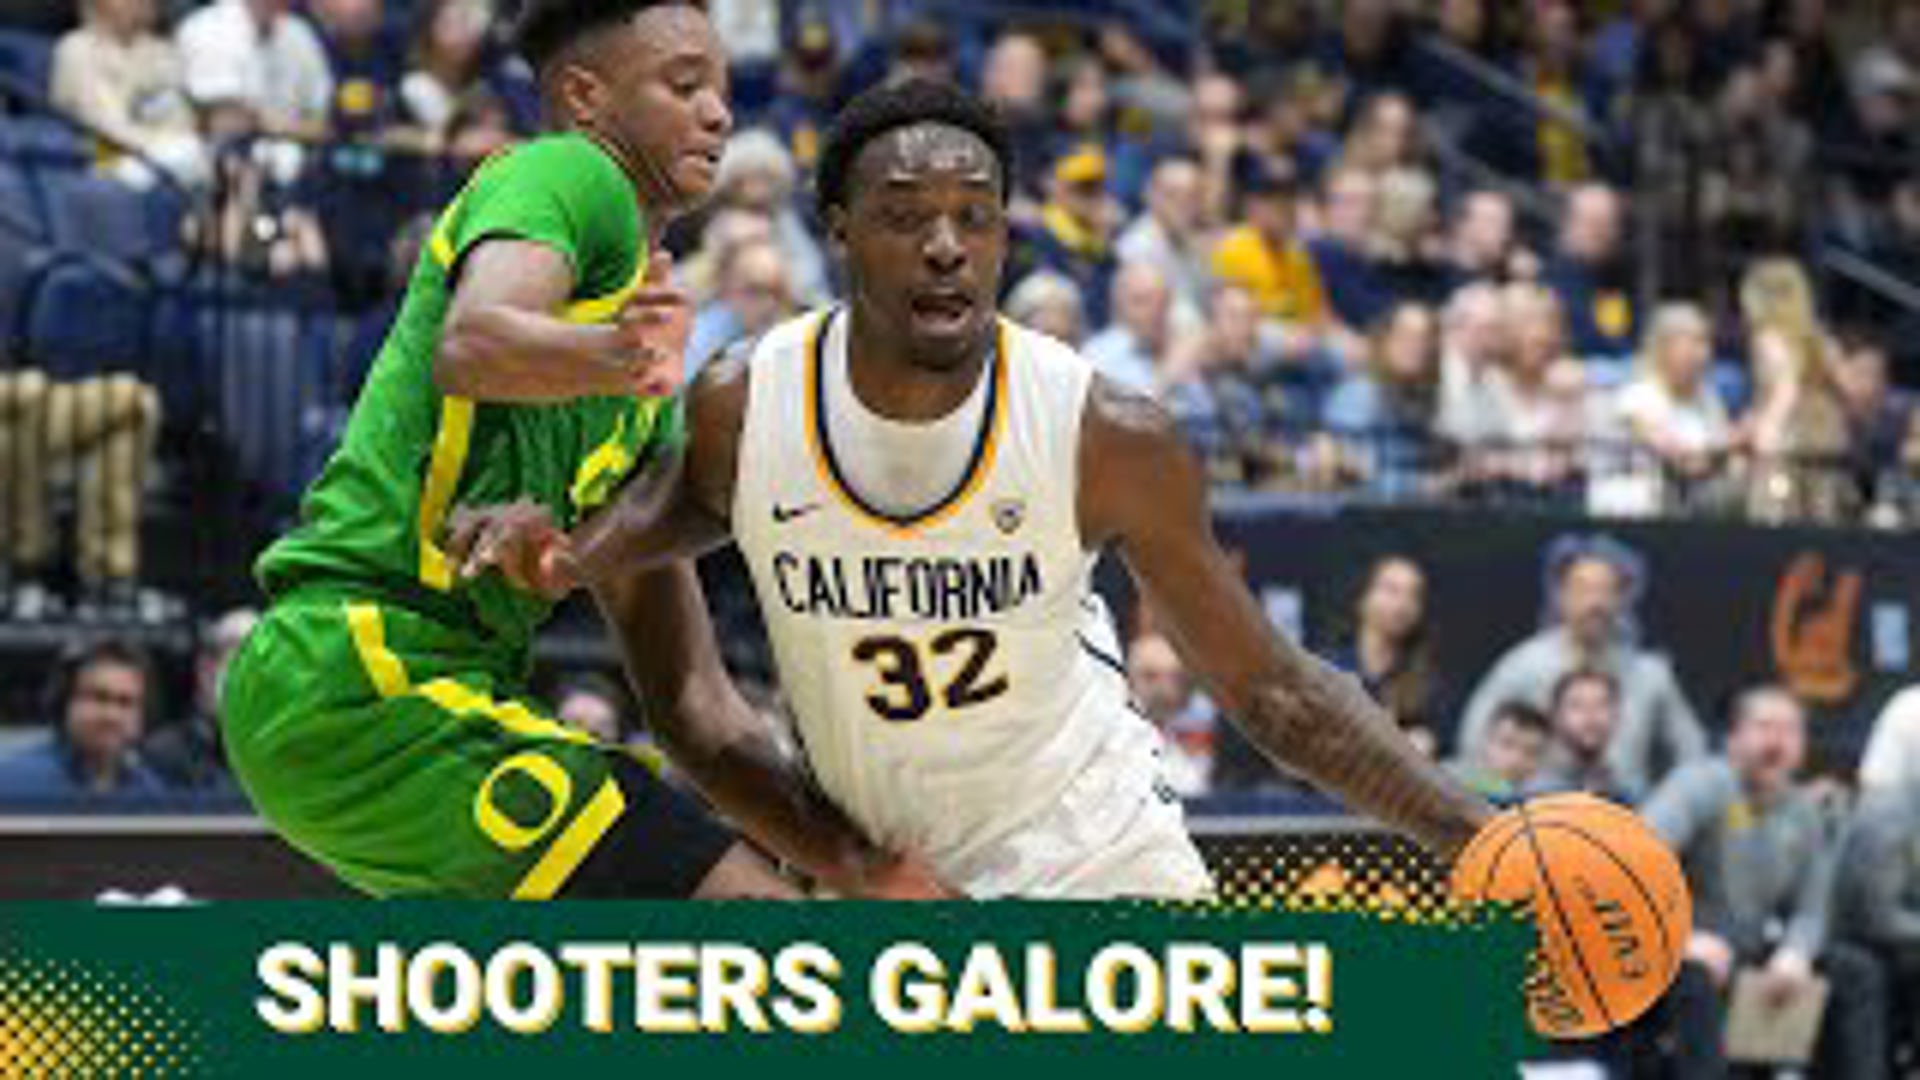 Former Cal guard Jalen Celestine committed to Baylor over the weekend, giving the Bears a 44%(!) 3-point shooter out of the portal.